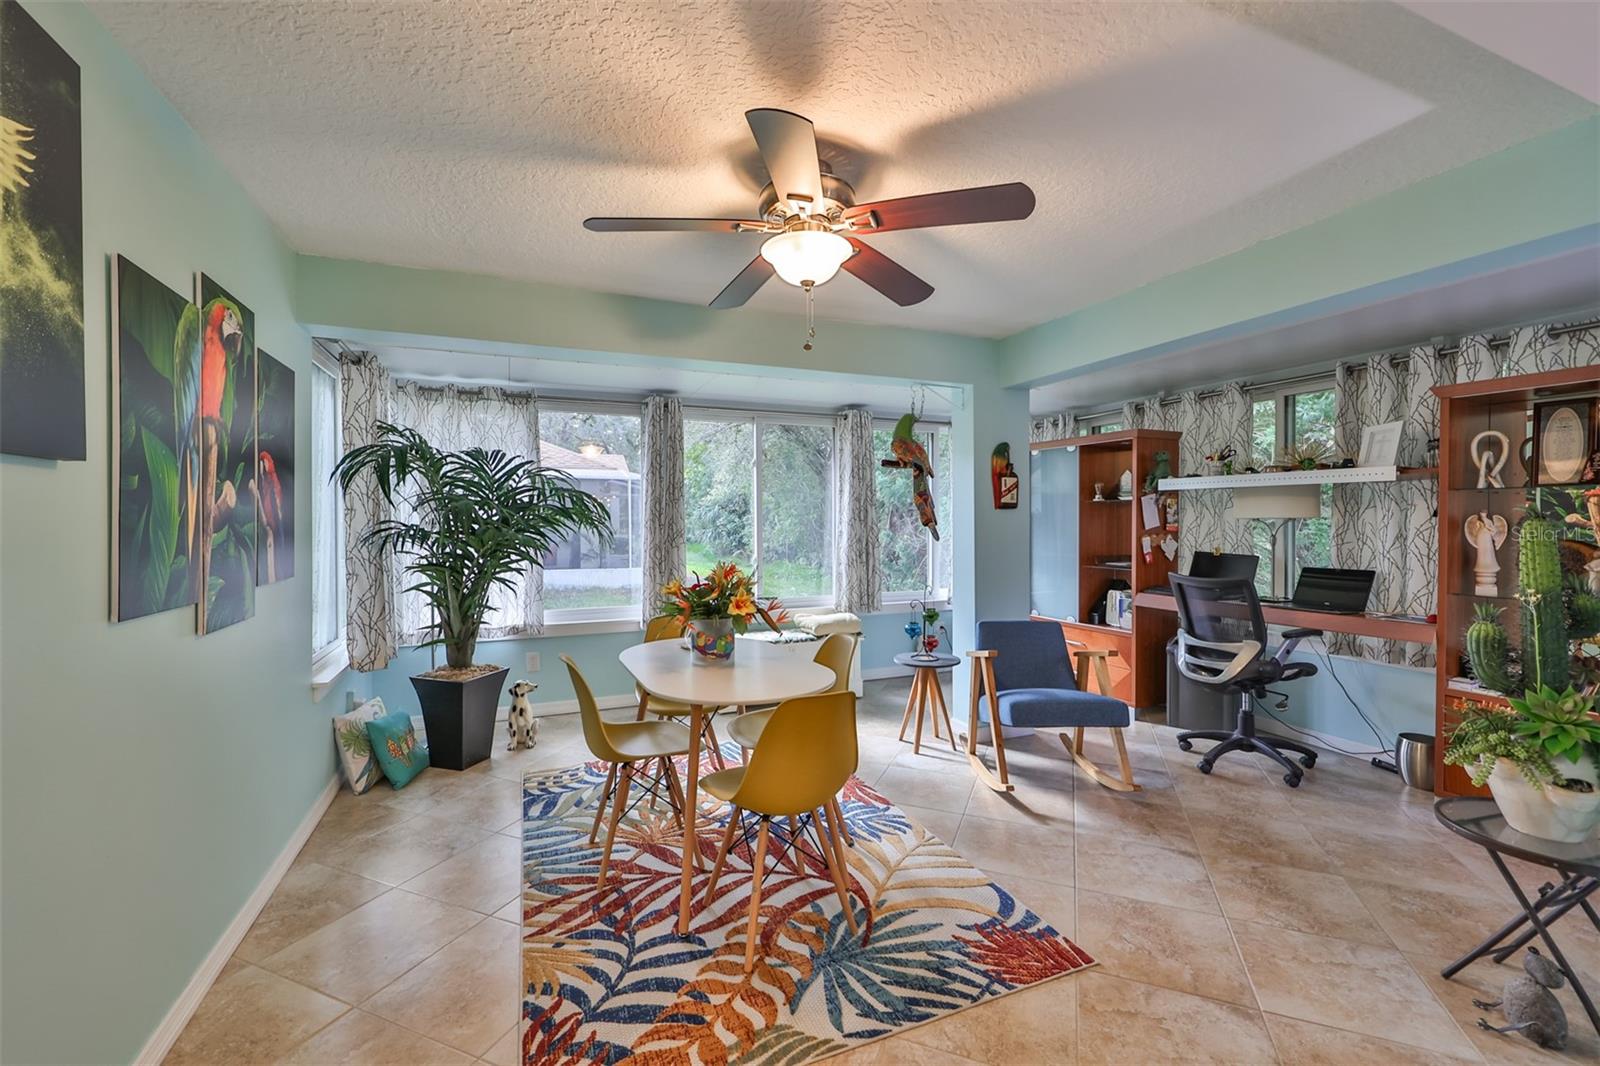 Large, extended Florida Room